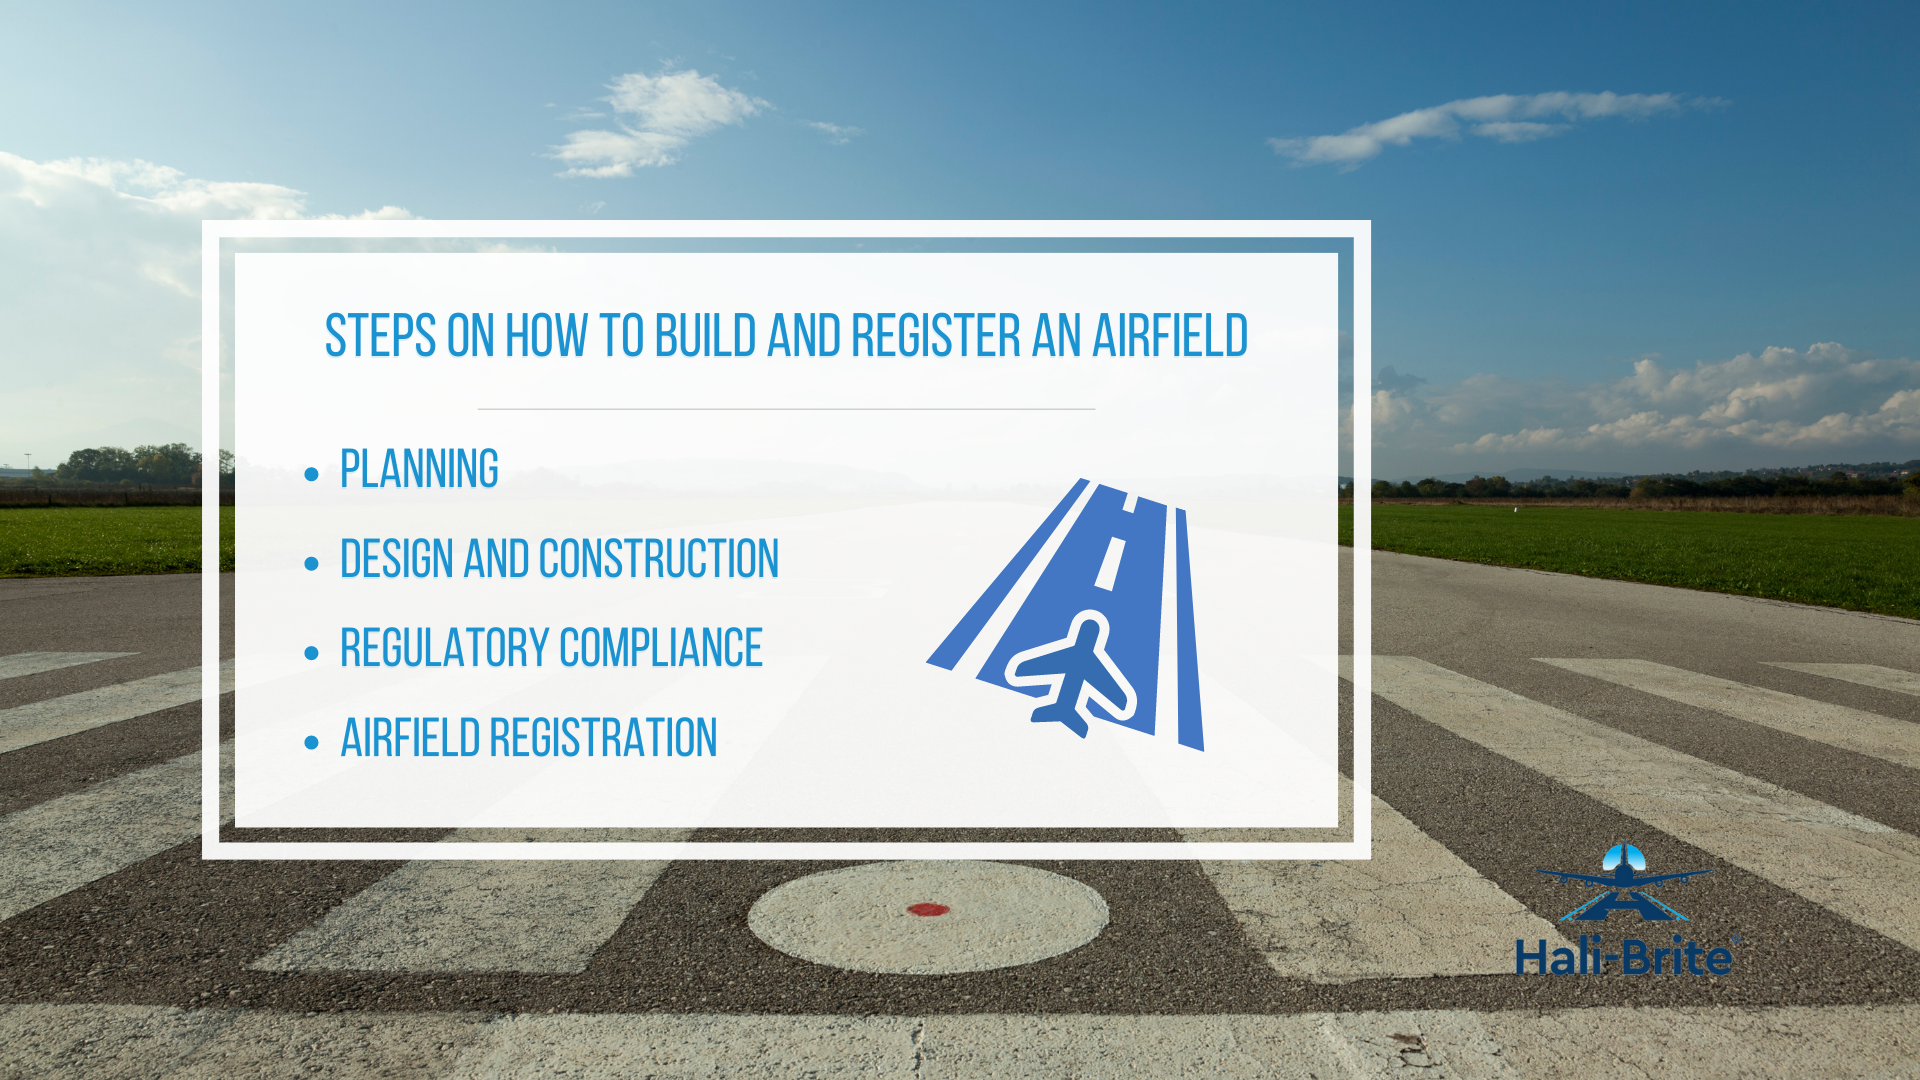 Infographic image of steps on how to build and register an airfield